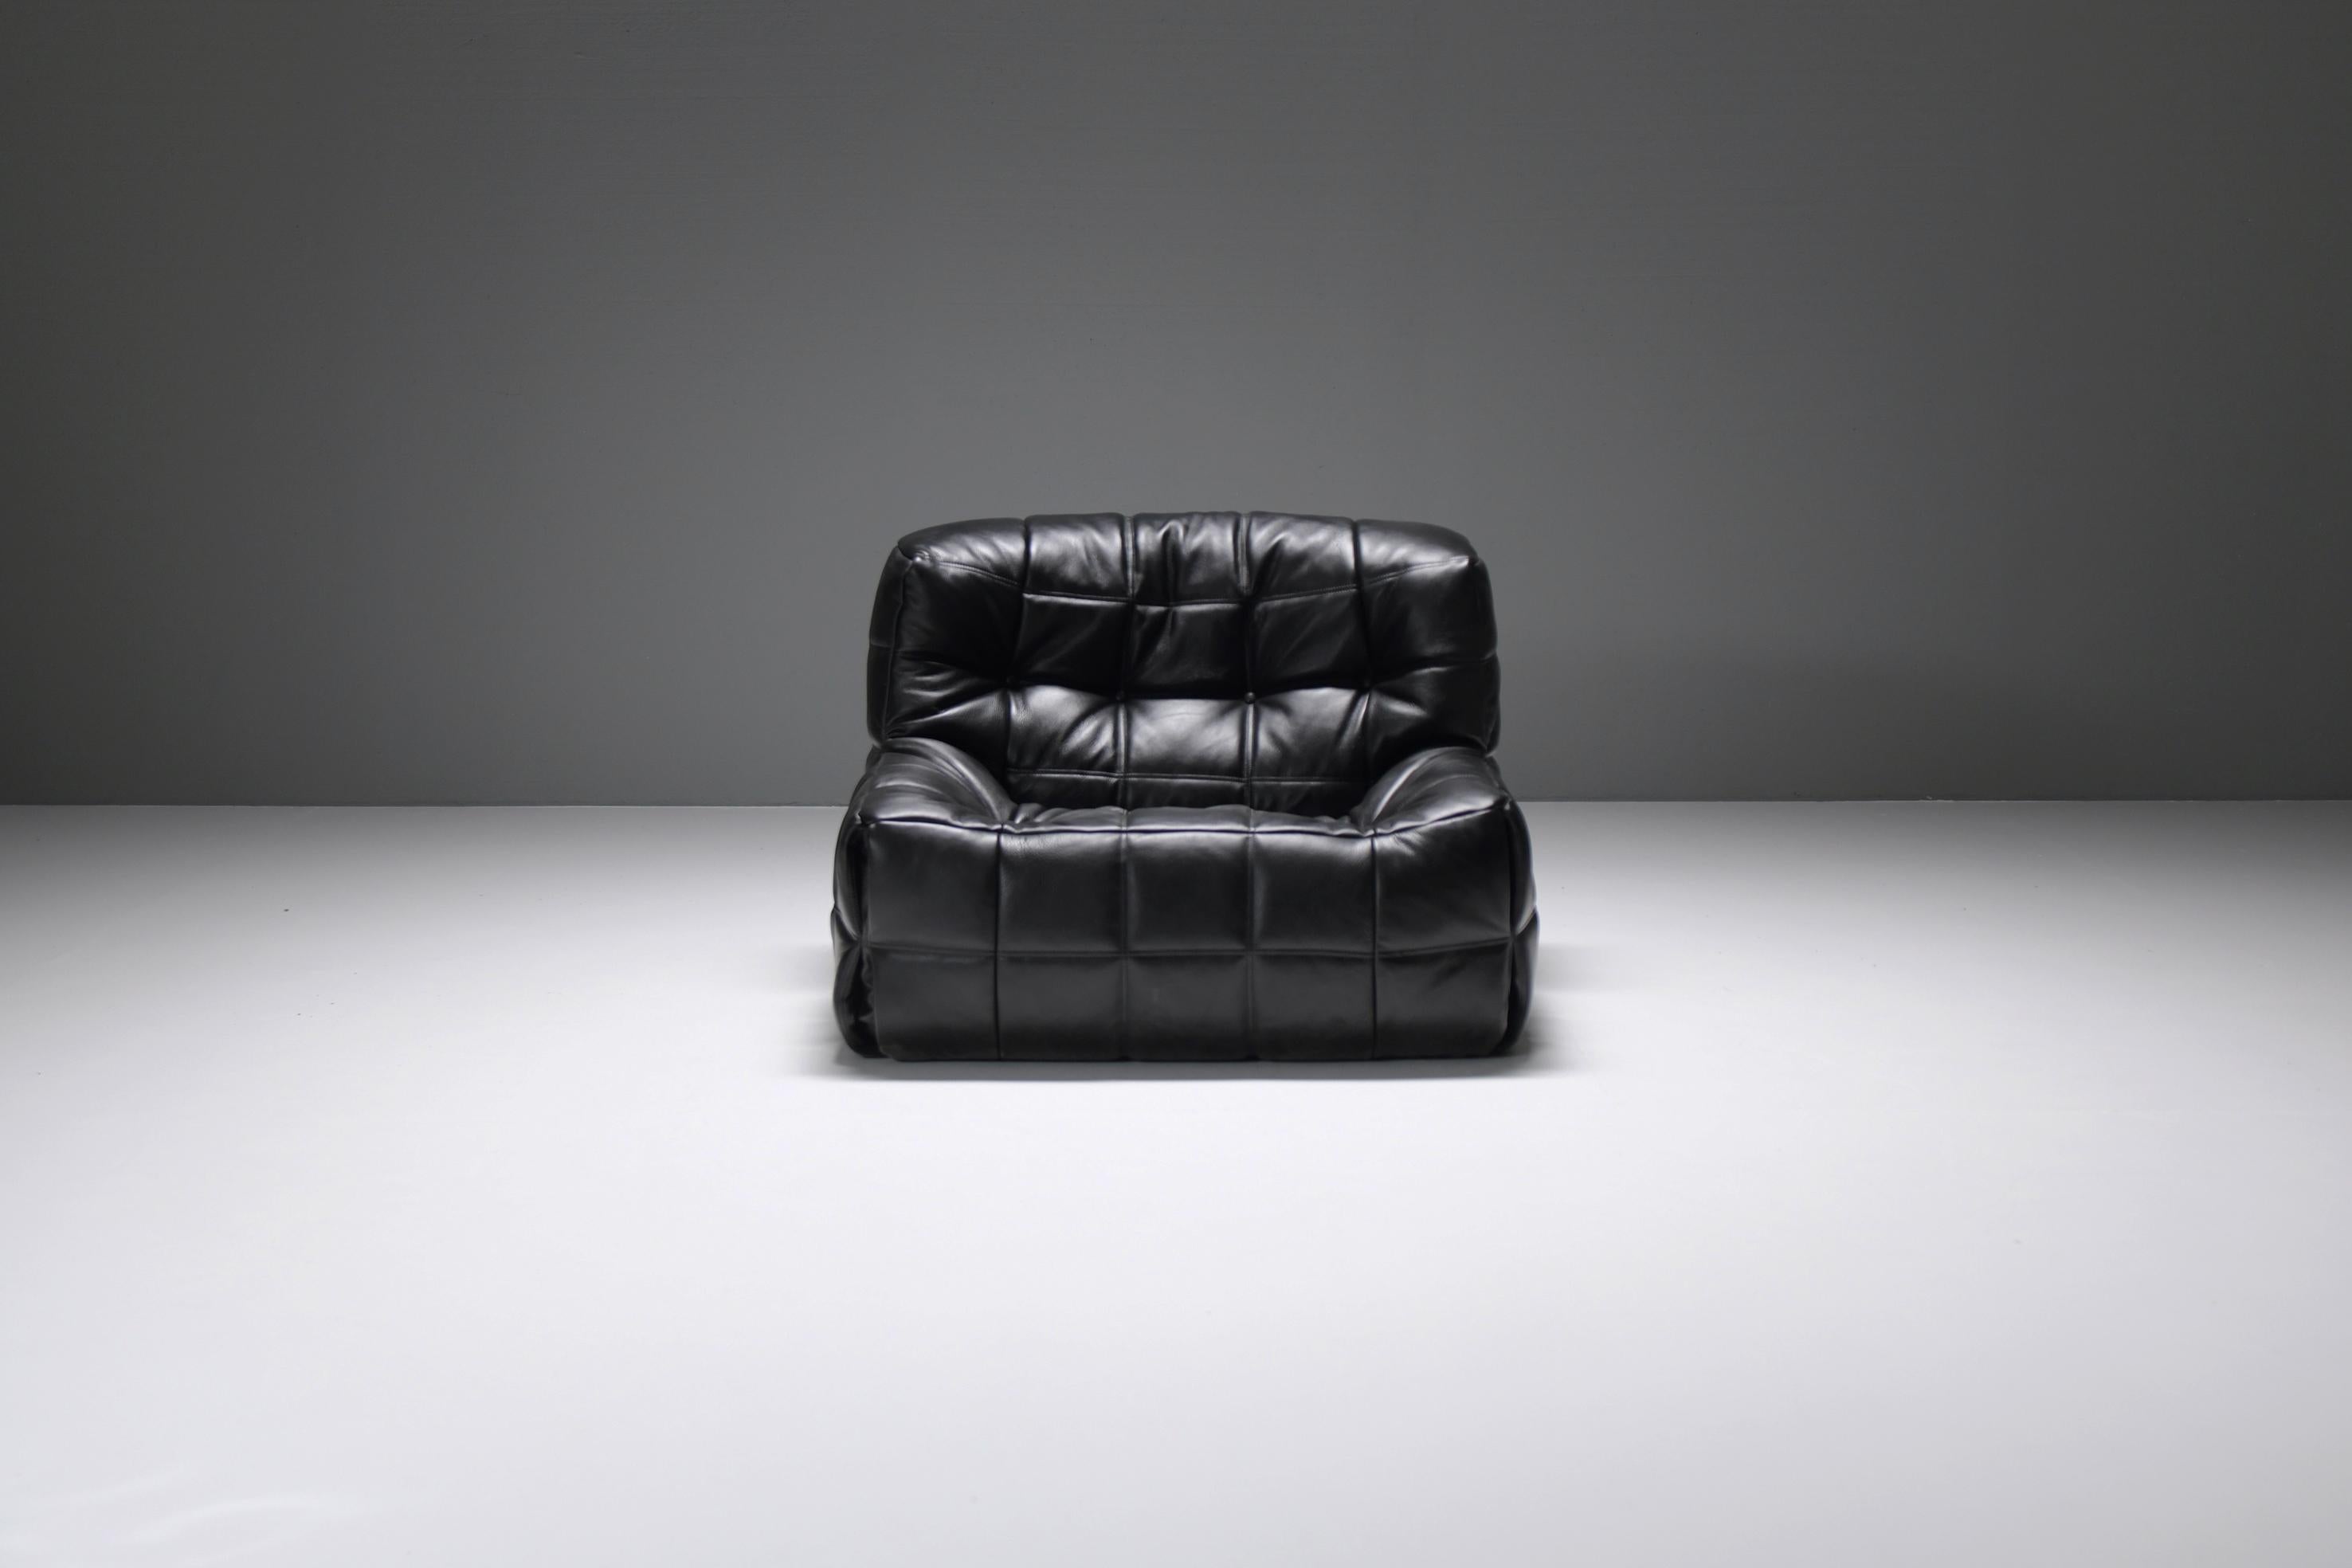 Beautiful Kashima 1-seater in stunning new black high quality leather.
Designed by Michel Ducaroy for Ligne roset France.
First owner (1980)

Super comfortable low lounge sofa designed by Michel Ducaroy, manufactured by Ligne Roset, France